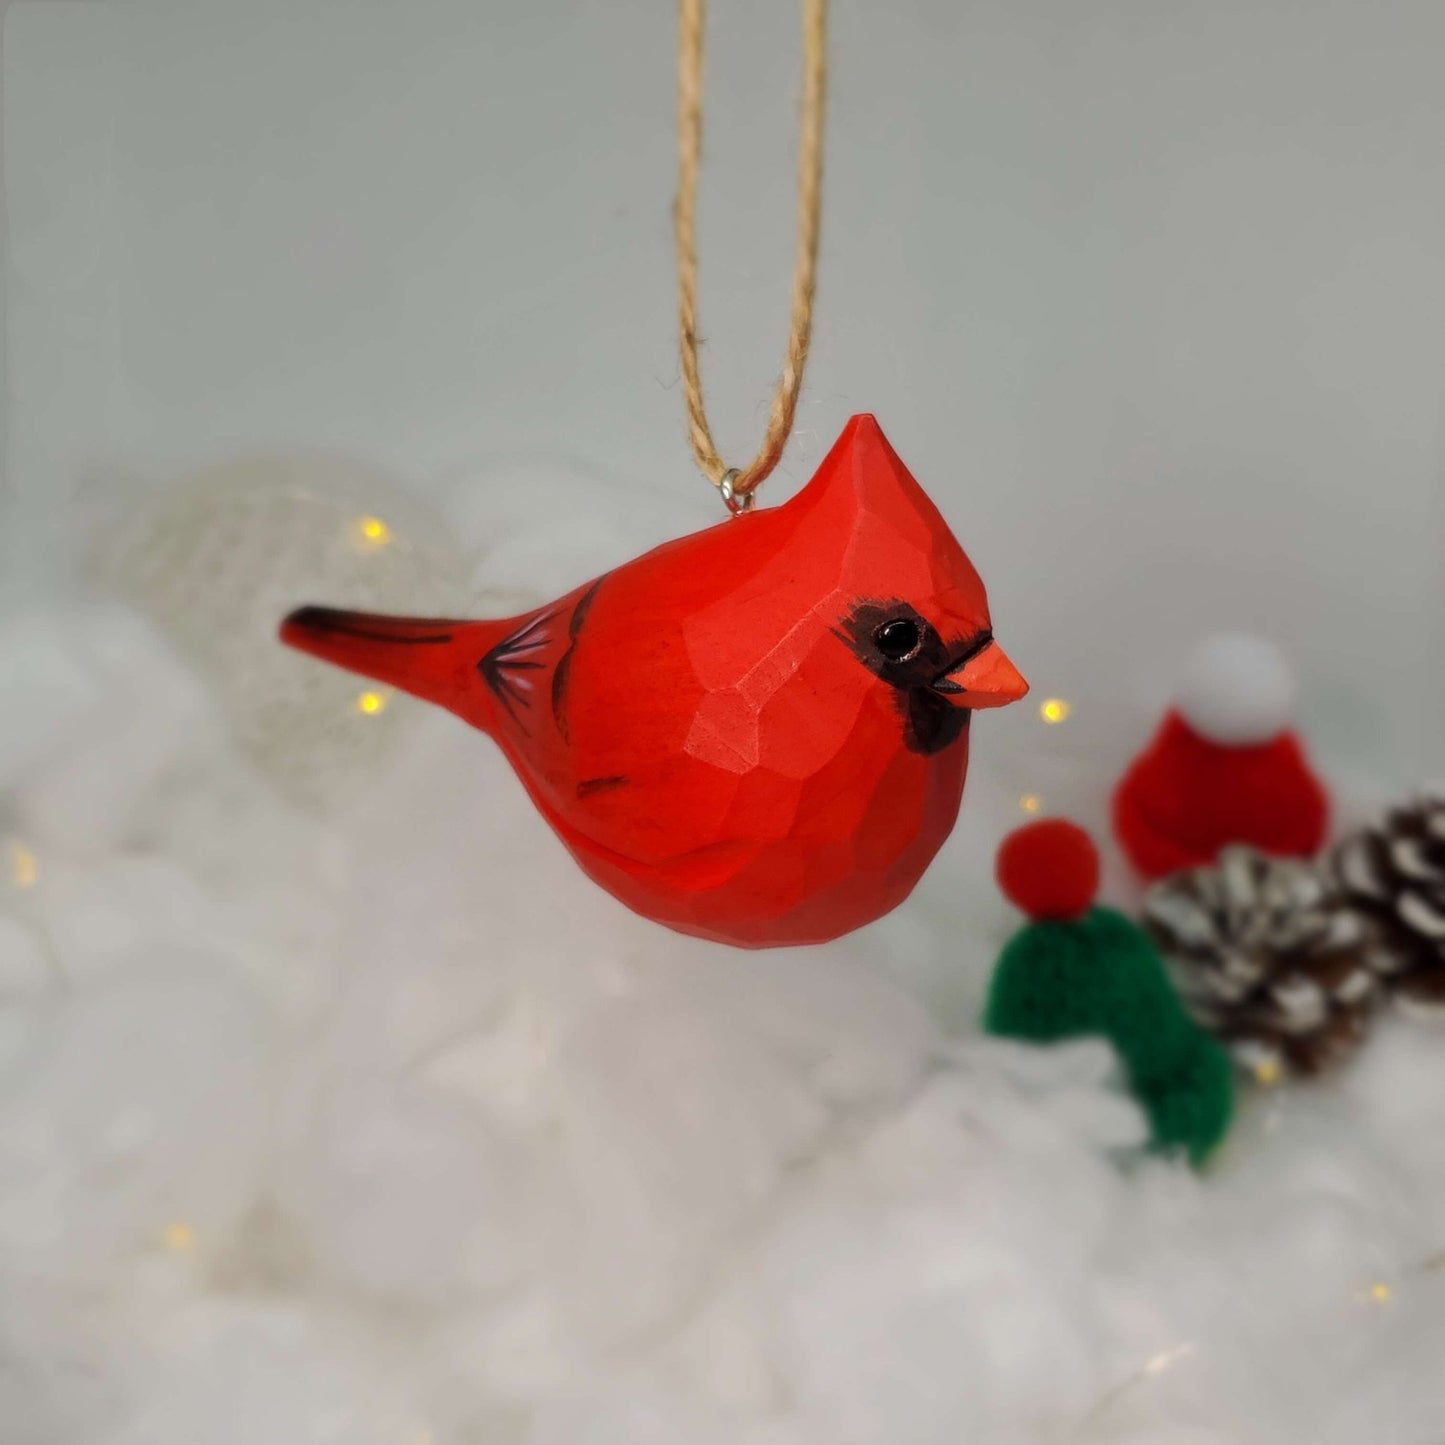 Northern Cardinal Male Ornaments - Wooden Islands